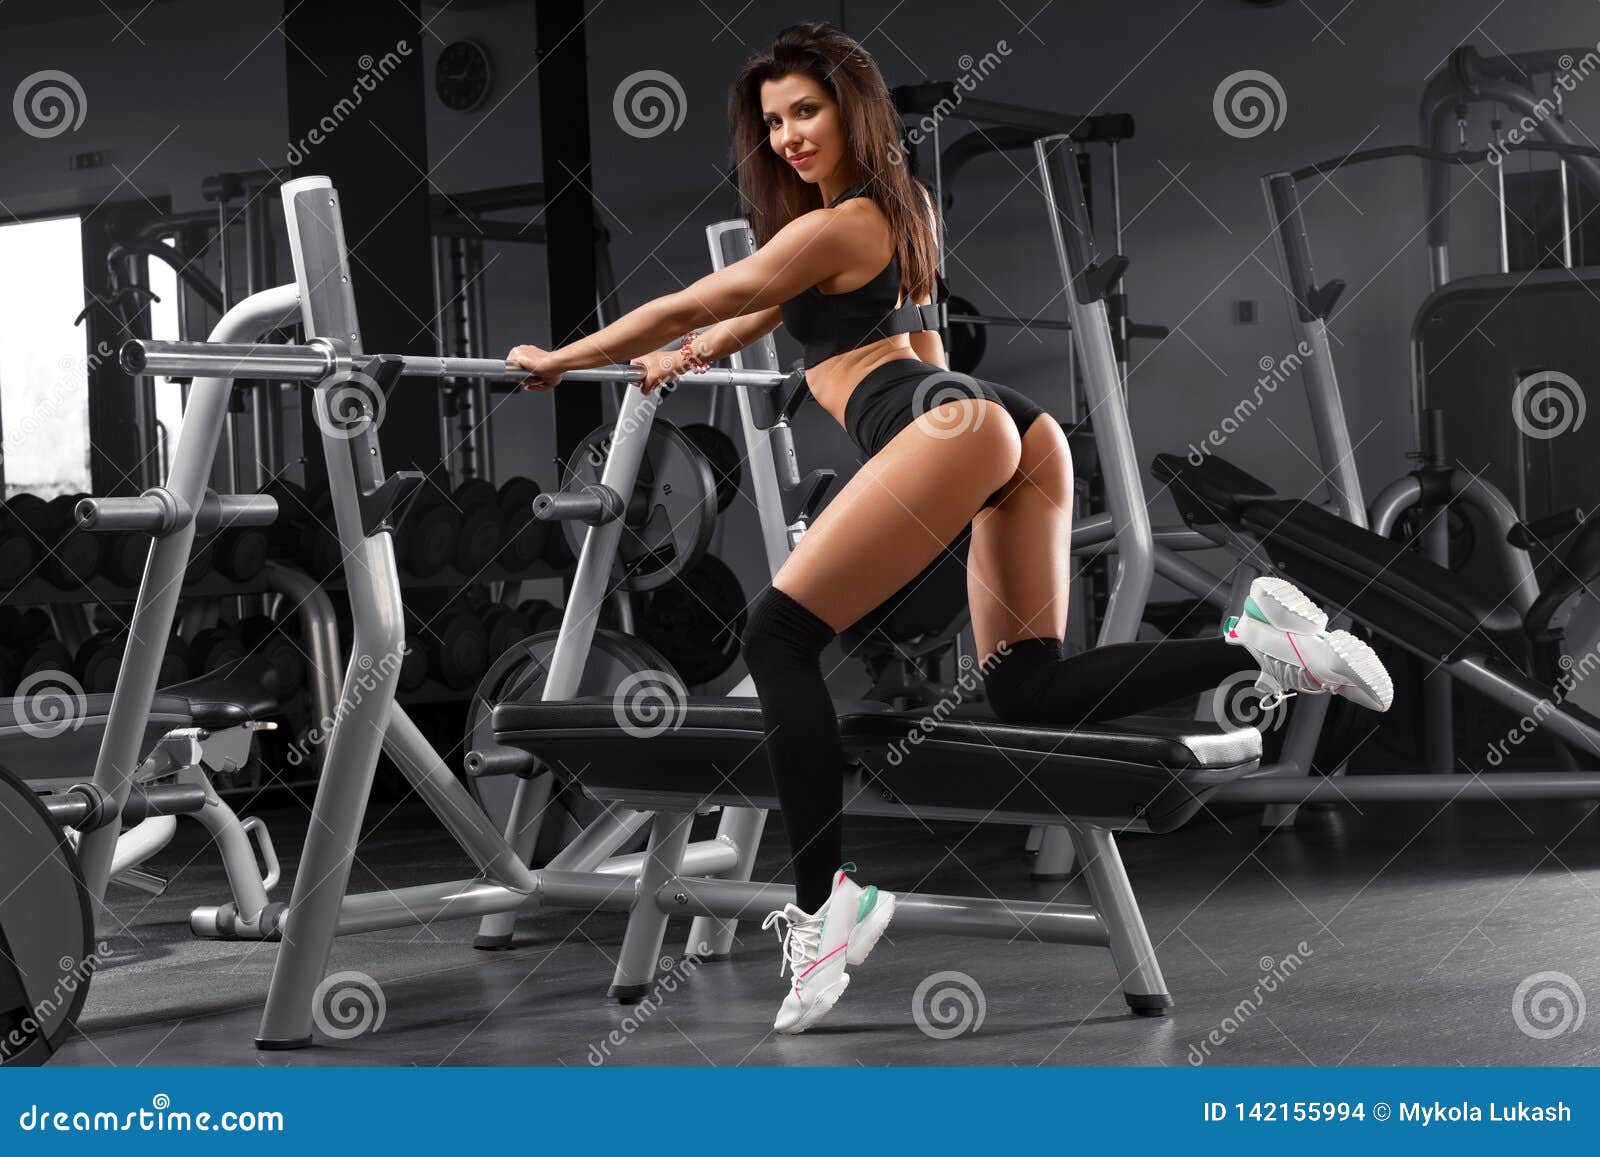 Athletic Girl Working Out in Gym. Buttocks in Thong Stock Photo